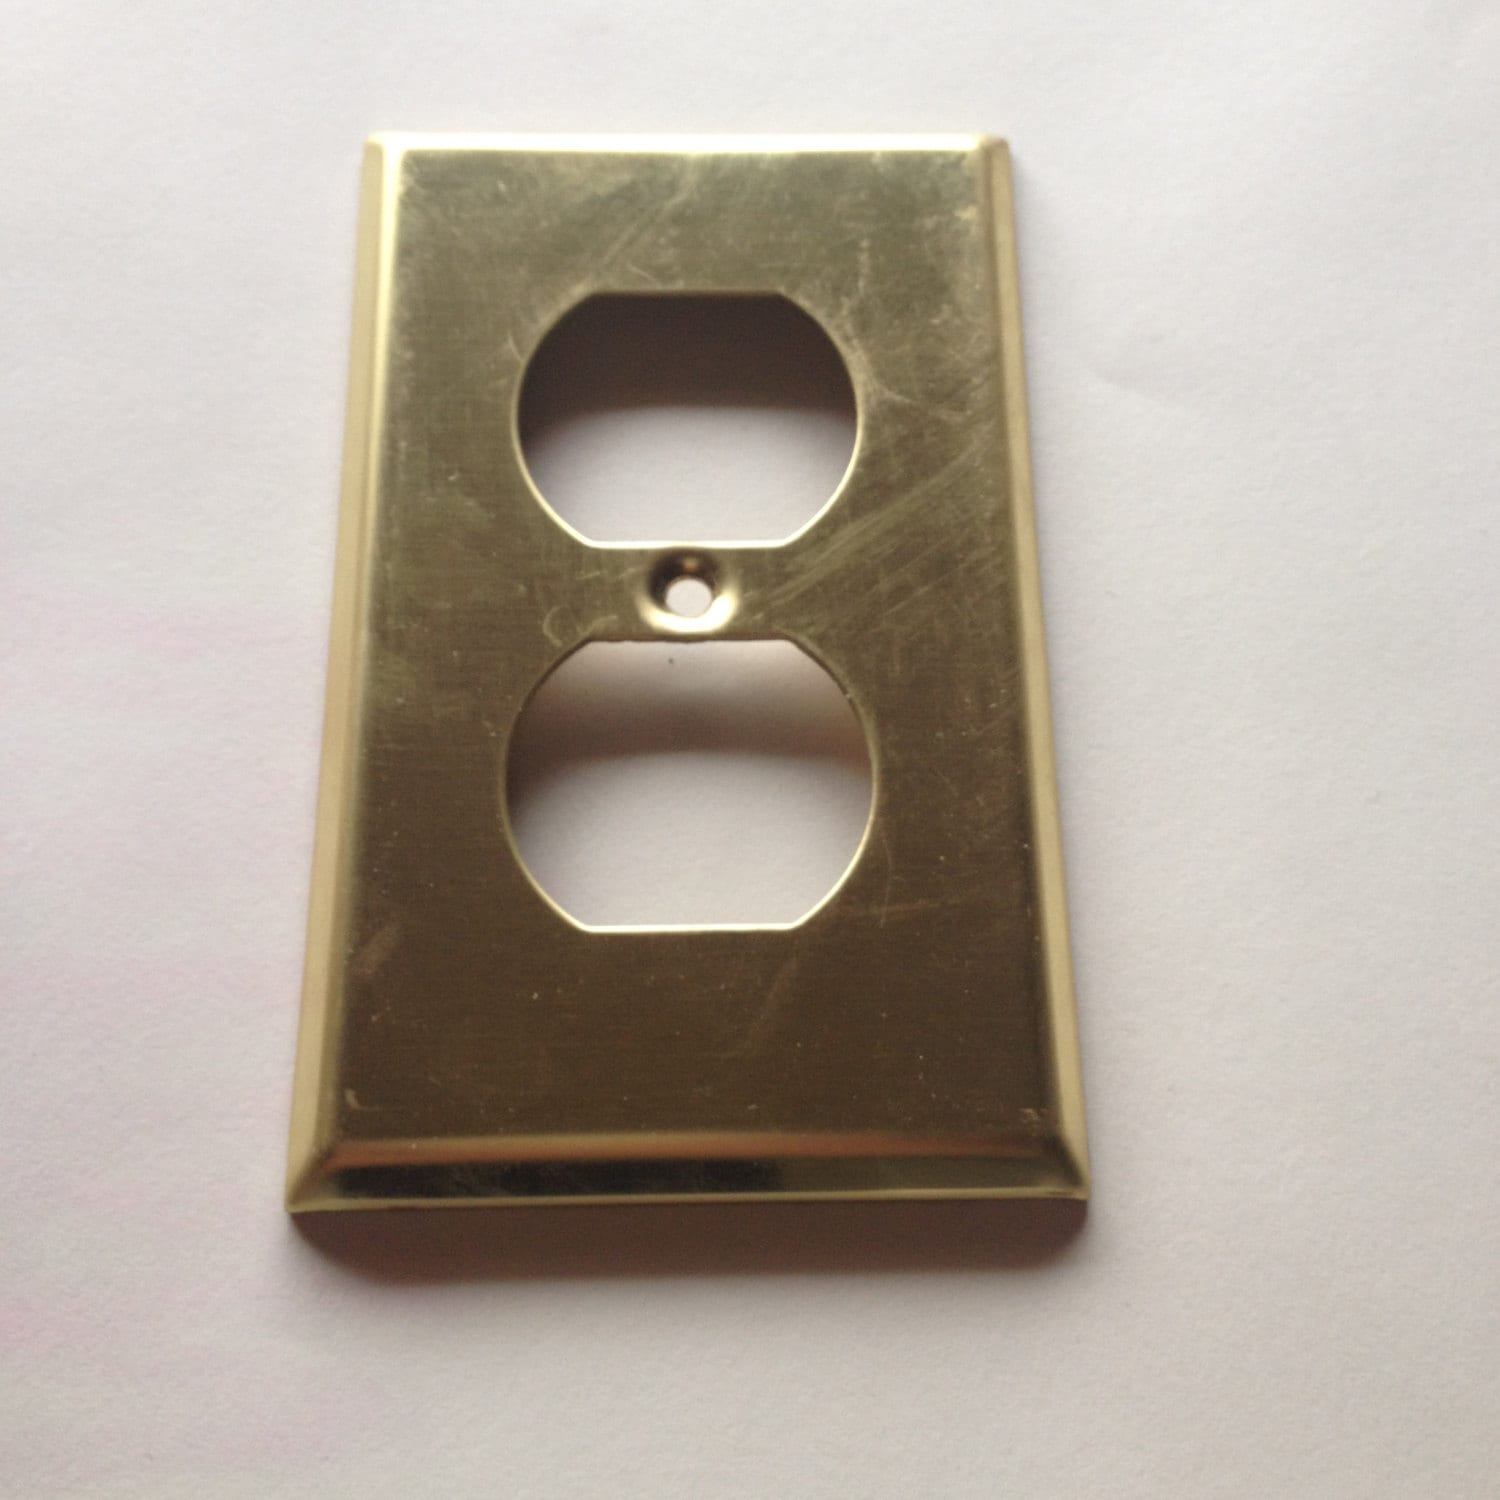 4 Brass Electrical Outlet Covers - Electrical Switch Covers ... - 4 Brass Electrical Outlet Covers - Electrical Switch Covers Decorative  Switch Plate outlet Cover